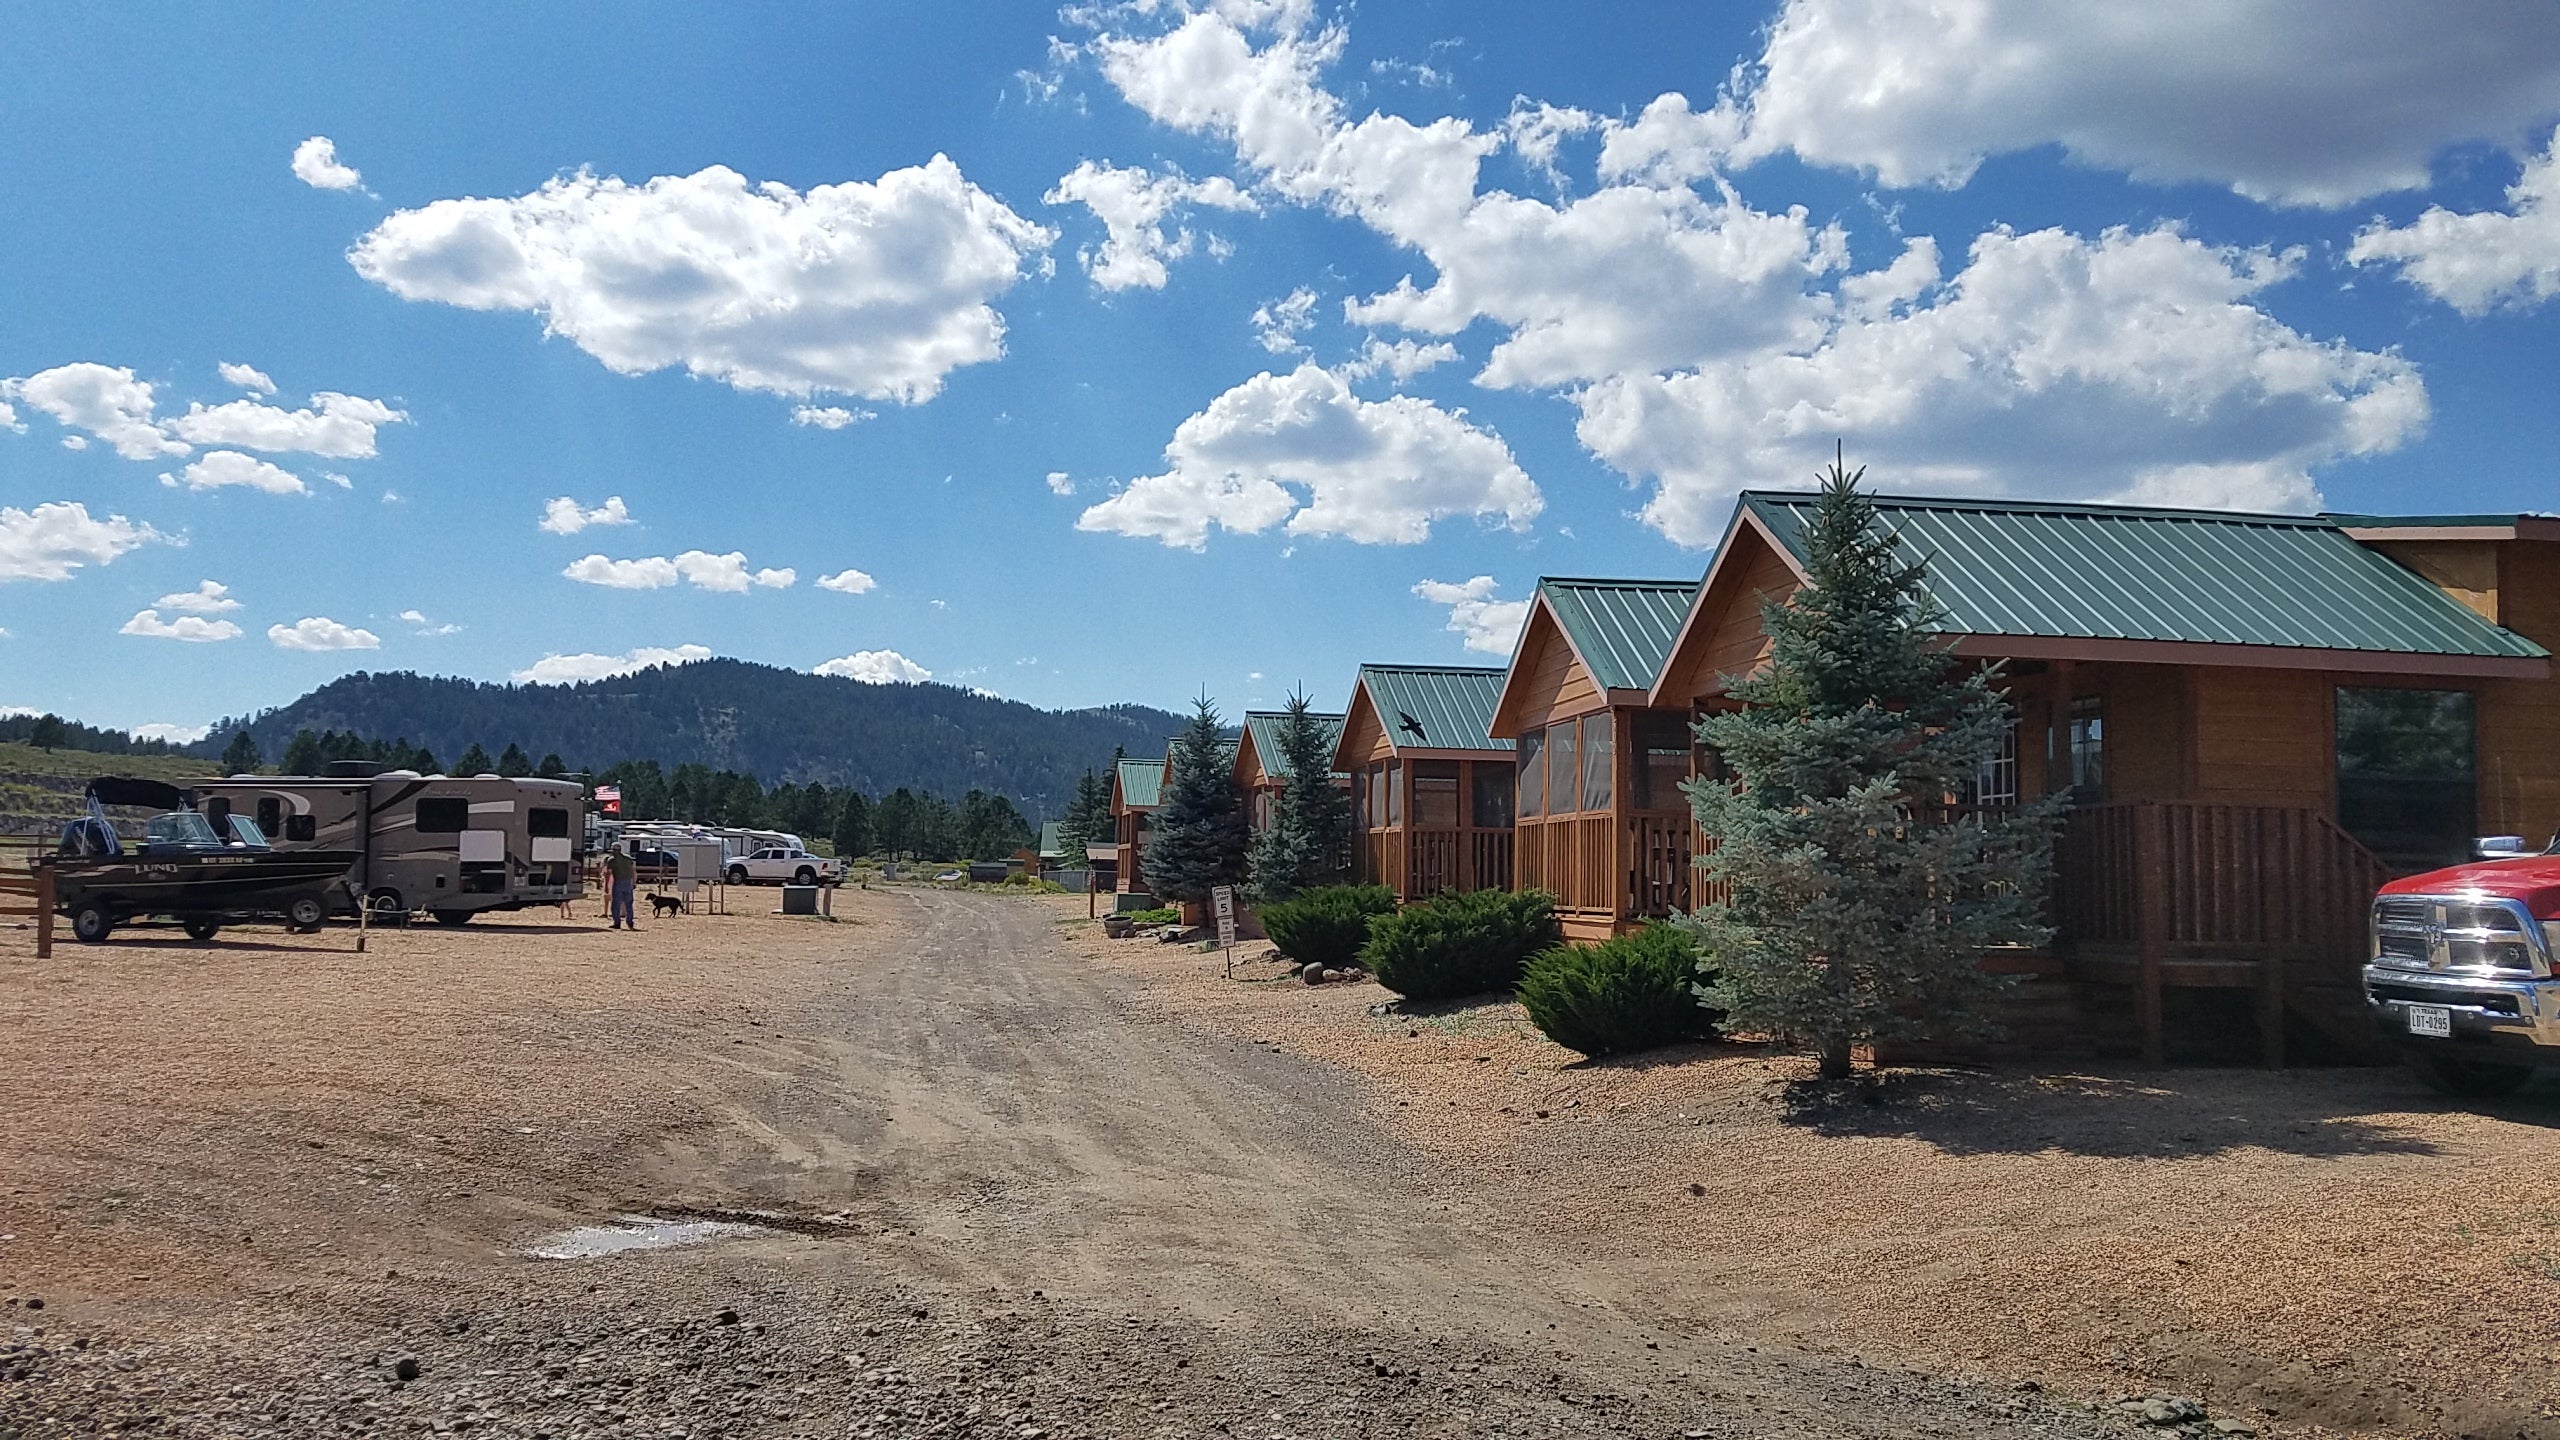 Camper submitted image from Panguitch Lake Adventure Resort - 4